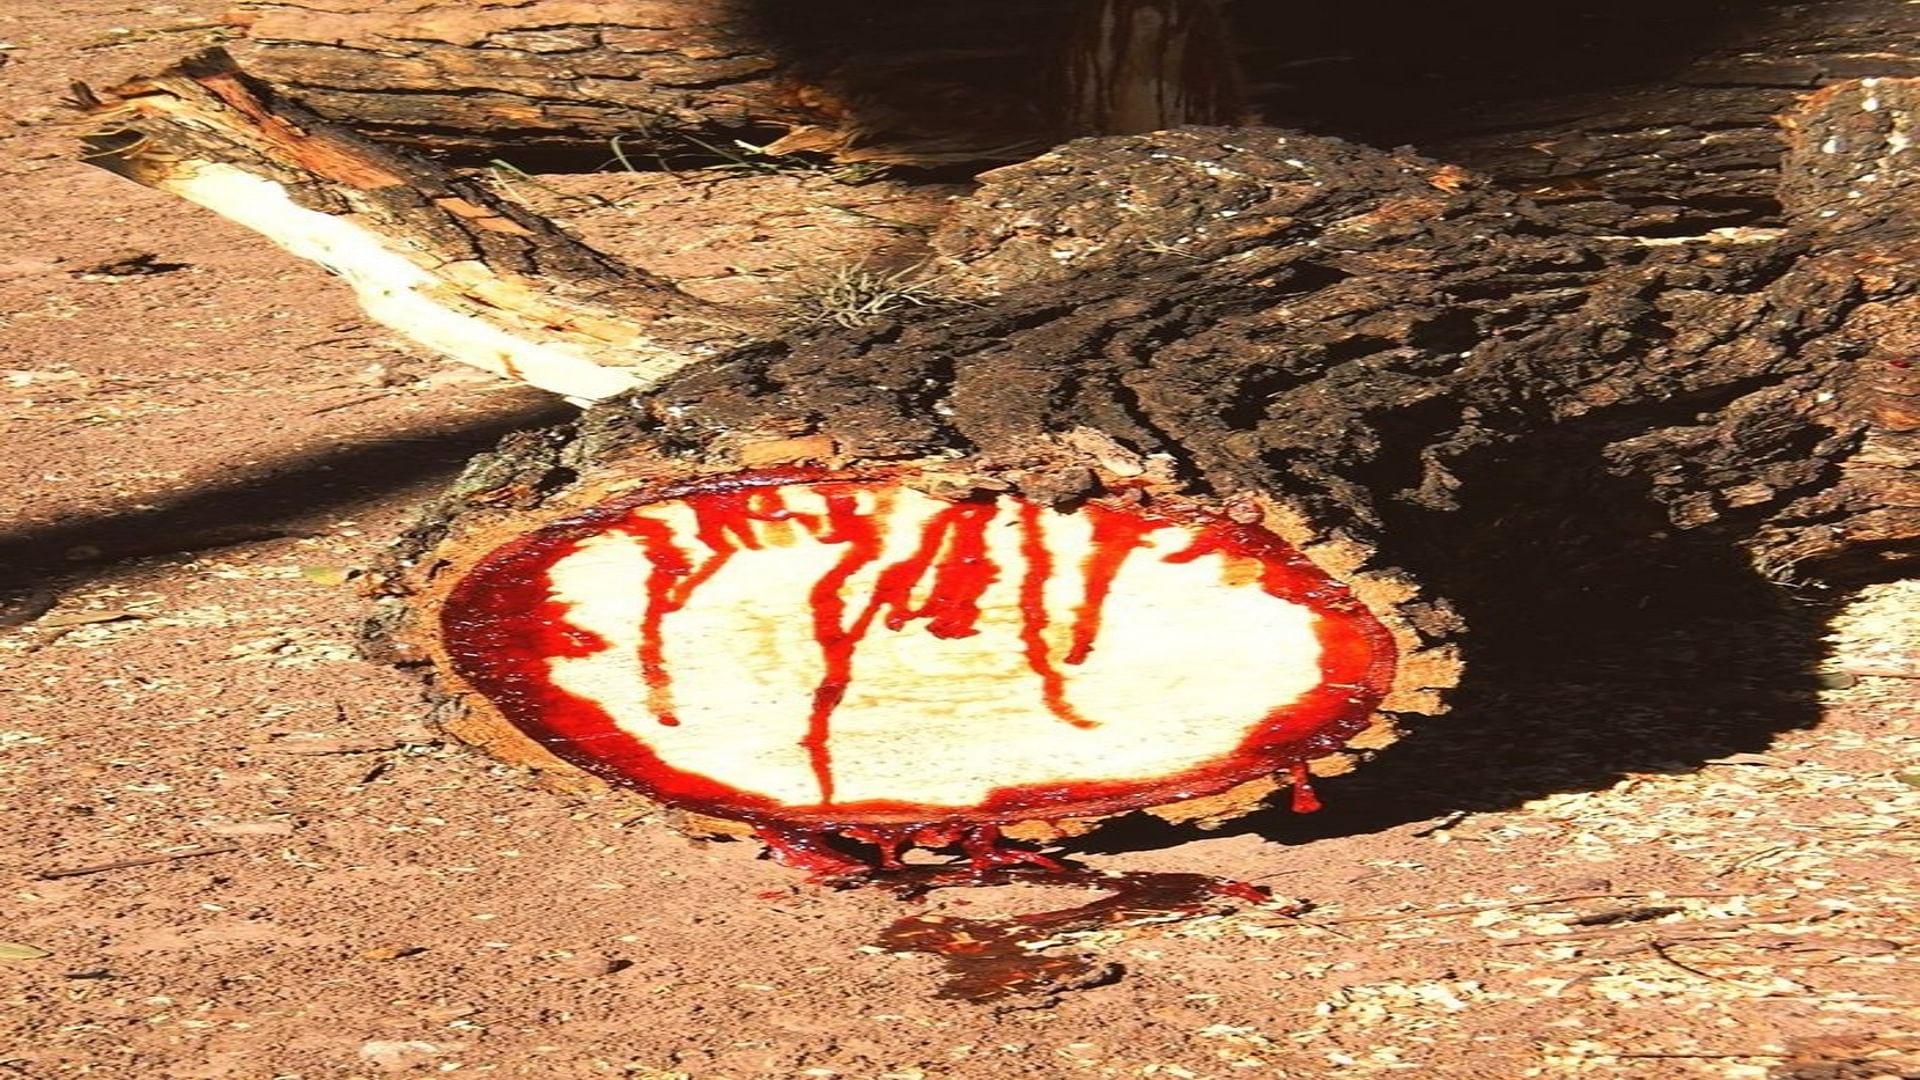 Weird Tree bloodwood tree humans like blood comes out from this tree when cut  magical tree